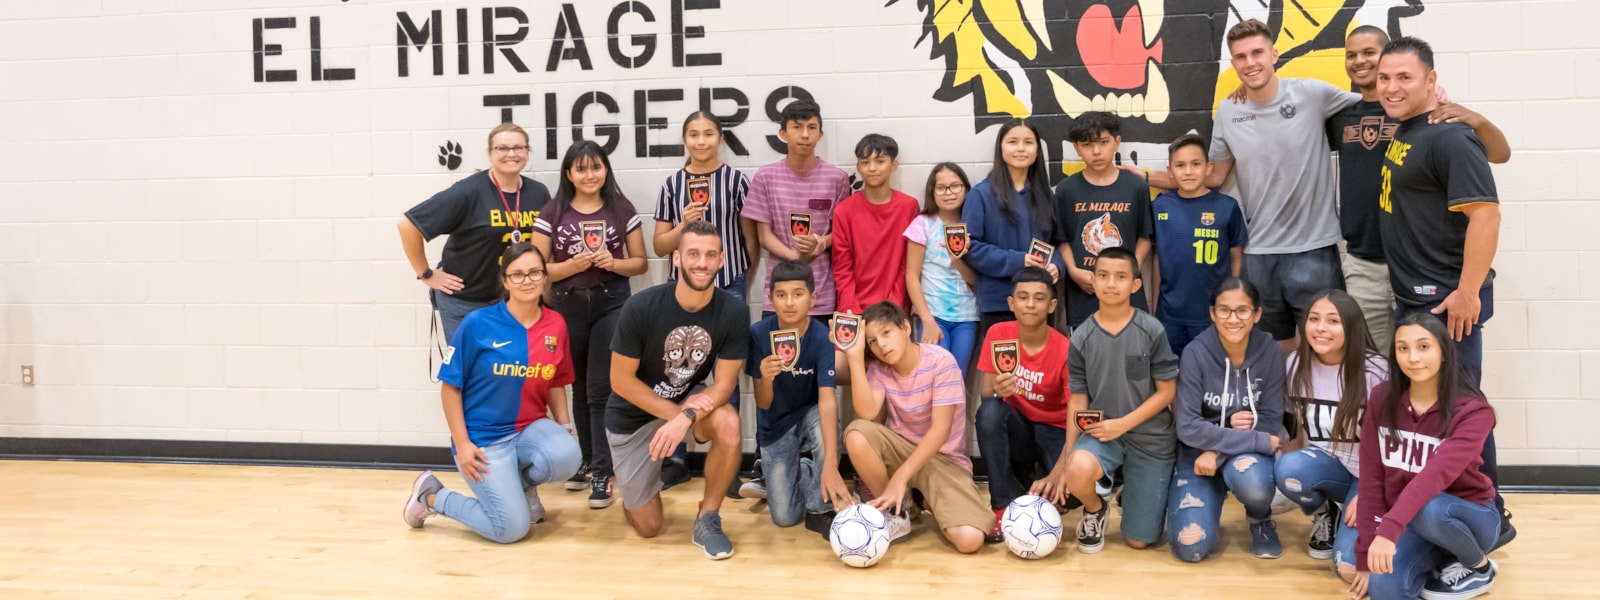 Phoenix Rising soccer players pose with El Mirage students.